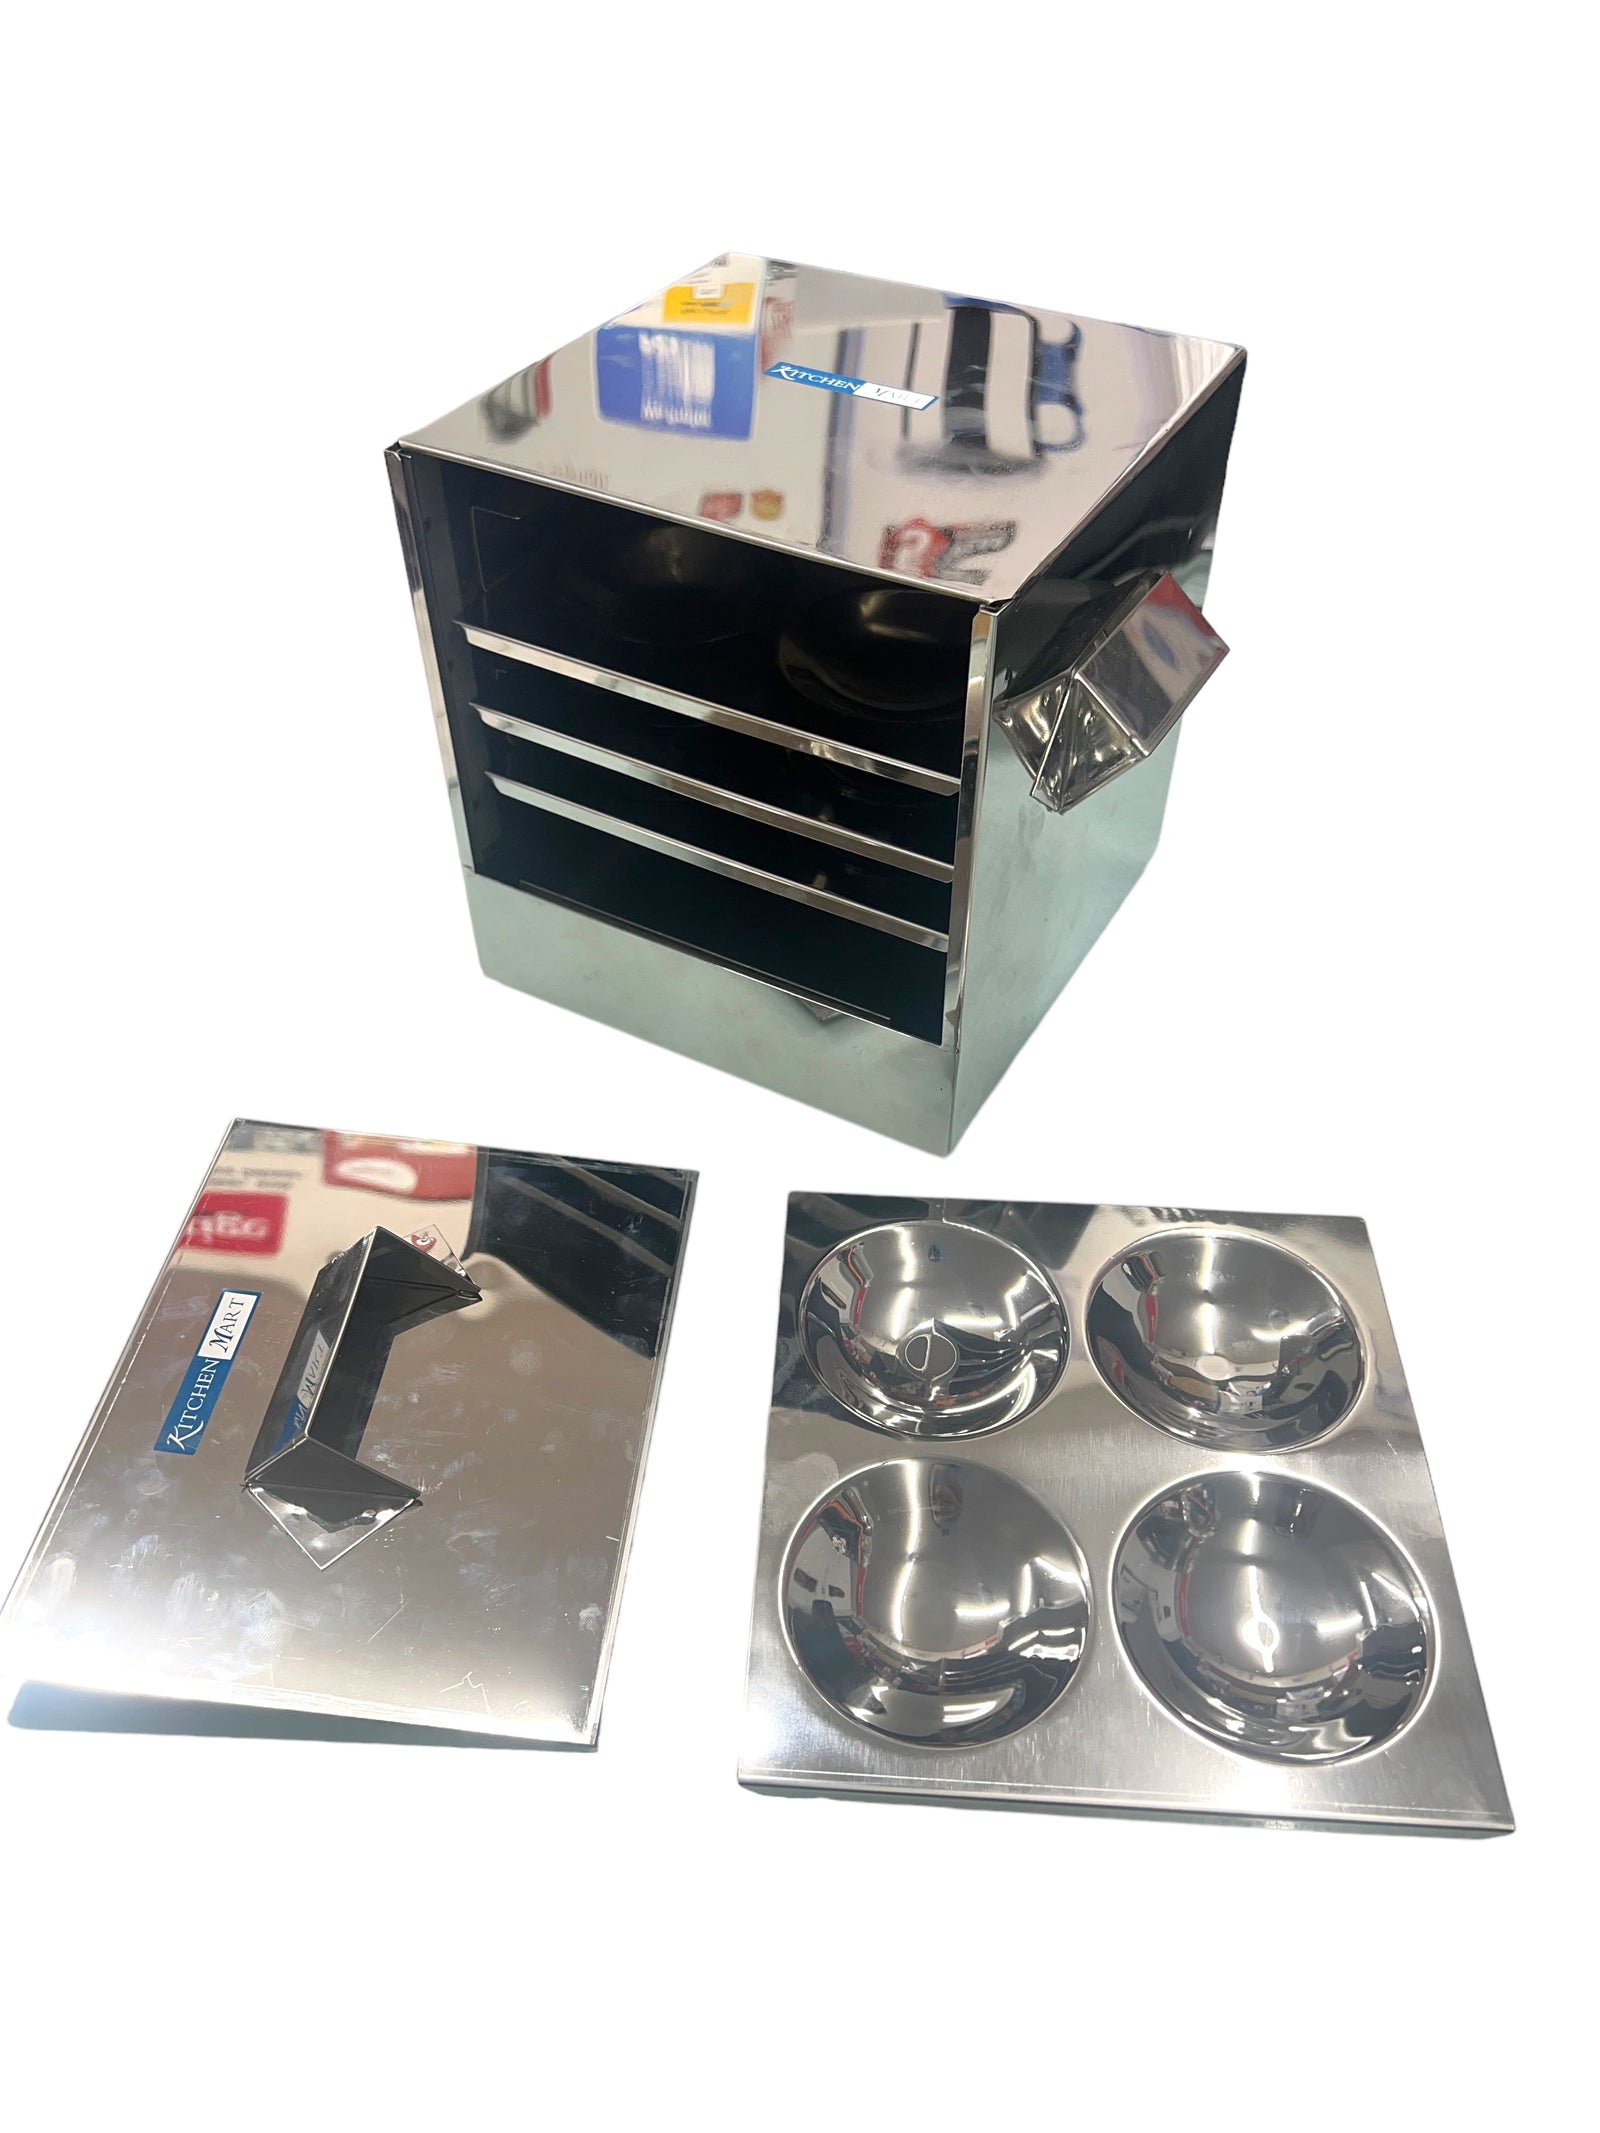 Coconut Premium Stainless Steel Box Type Idly Cooker - Perfectly Steamed Idlis Every Time!